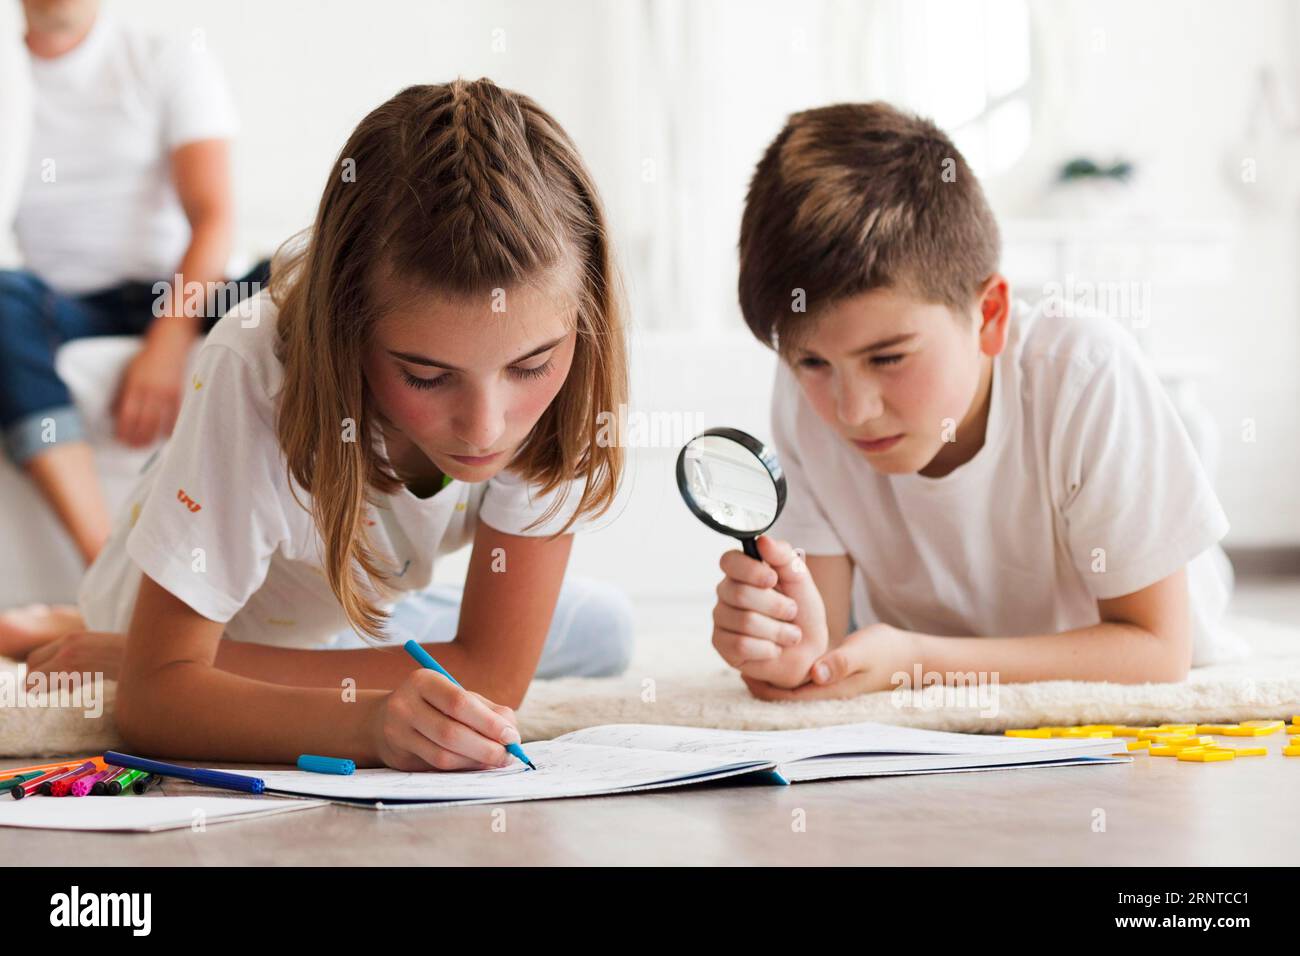 Boy looking through magnifying glass during his sister drawing book Stock Photo